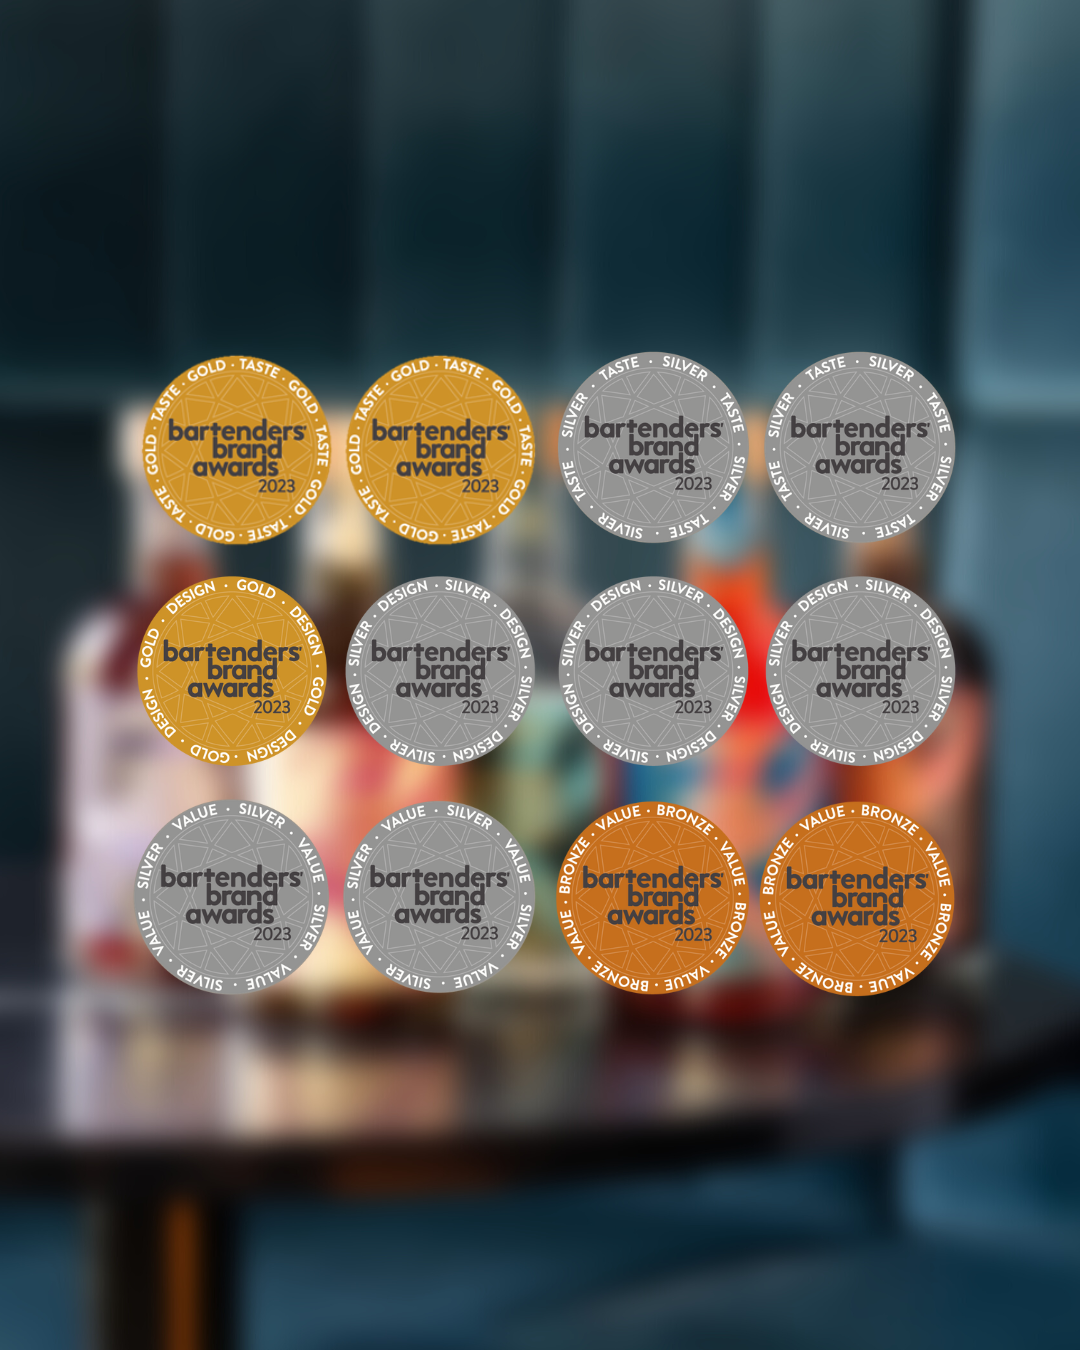 REBELS 0.0% WON 12 MEDALS FROM THE BARTENDERS BRAND AWARDS 2023